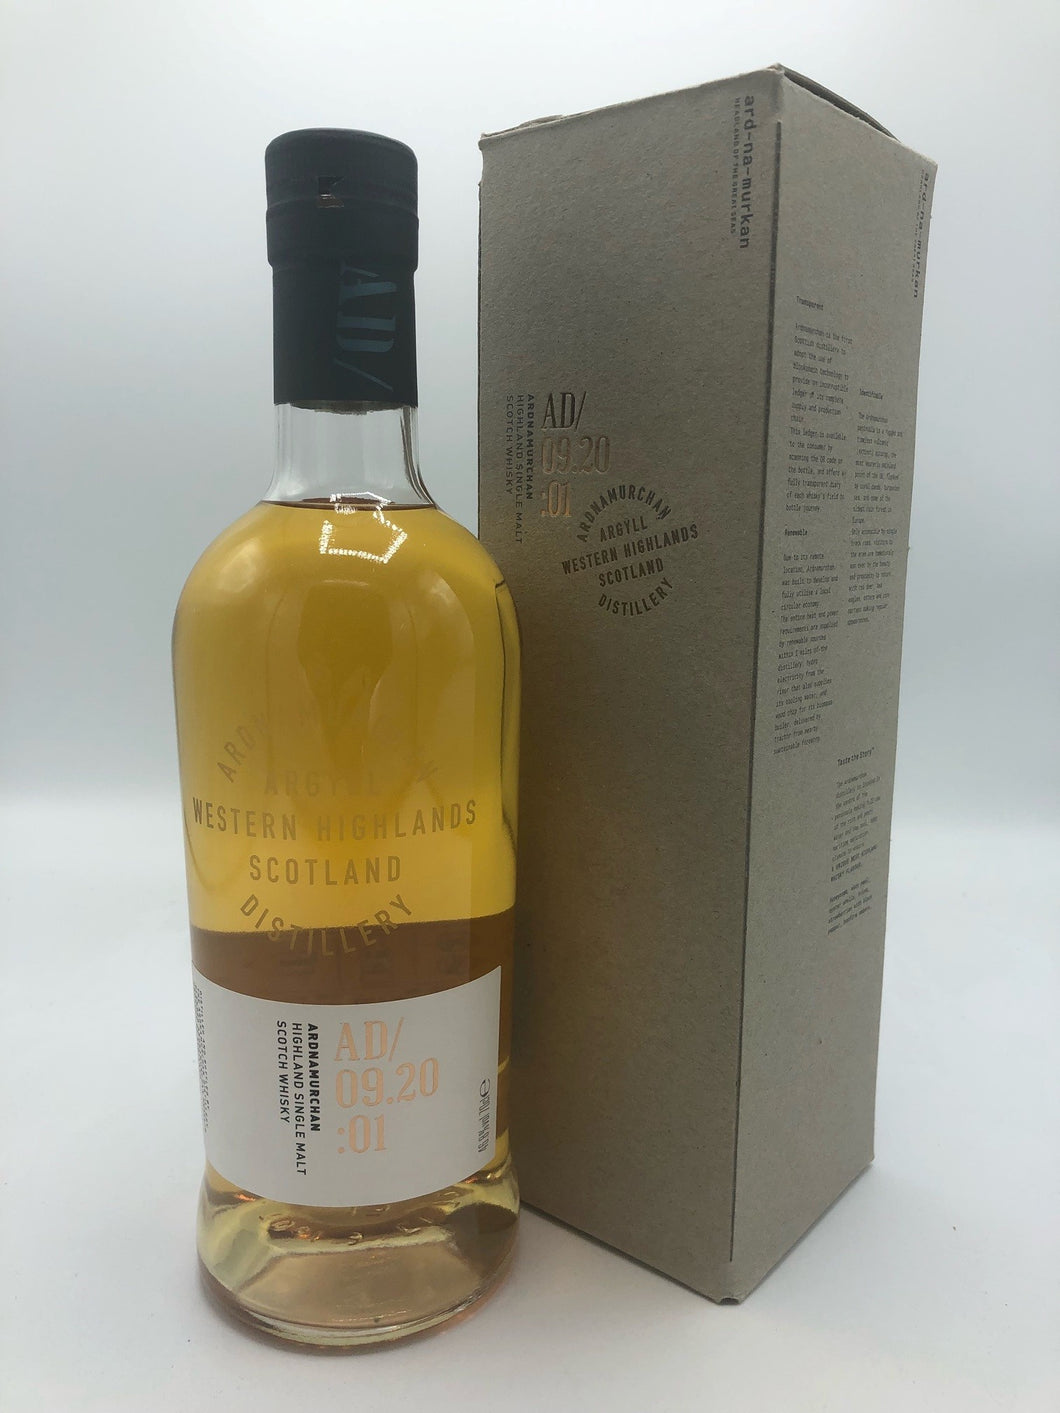 Ardnamurchan 09.20:01 Inaugural Release Export Edition